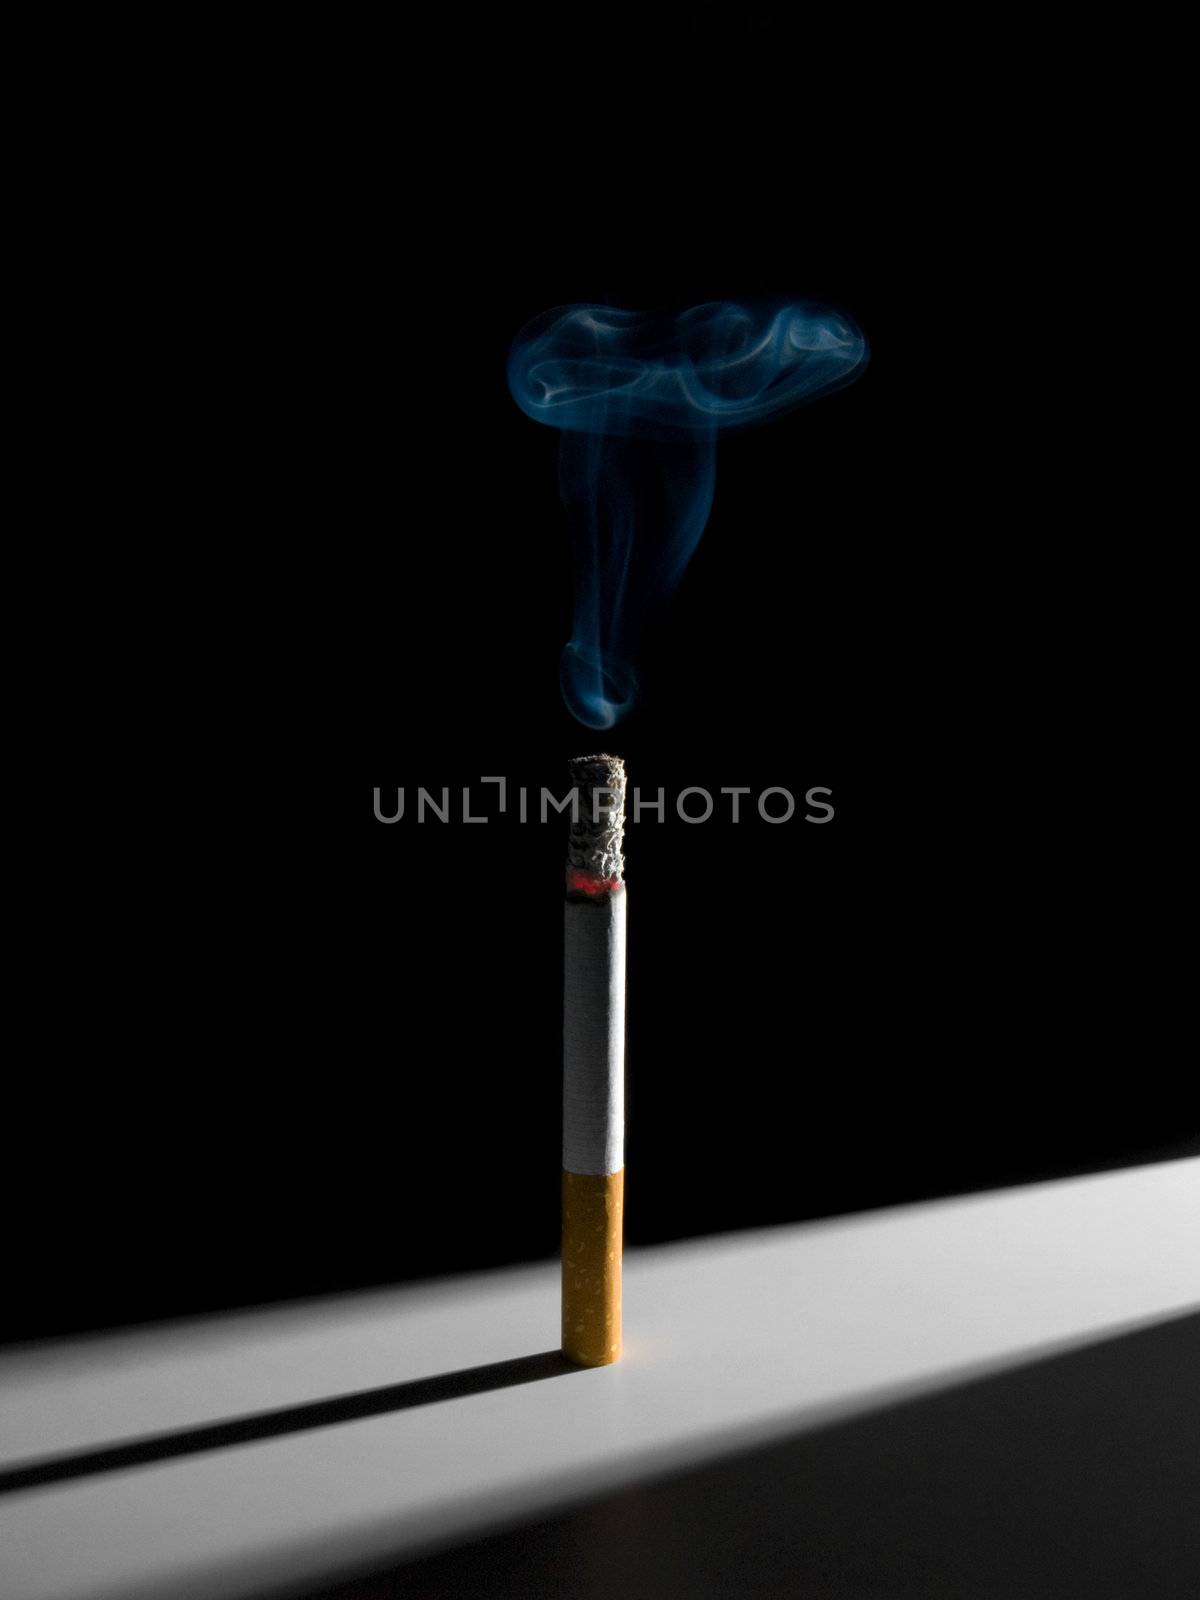 A single smoking cigarette standing in a narrow corridor of light. A conceptual image about the smoking habit.